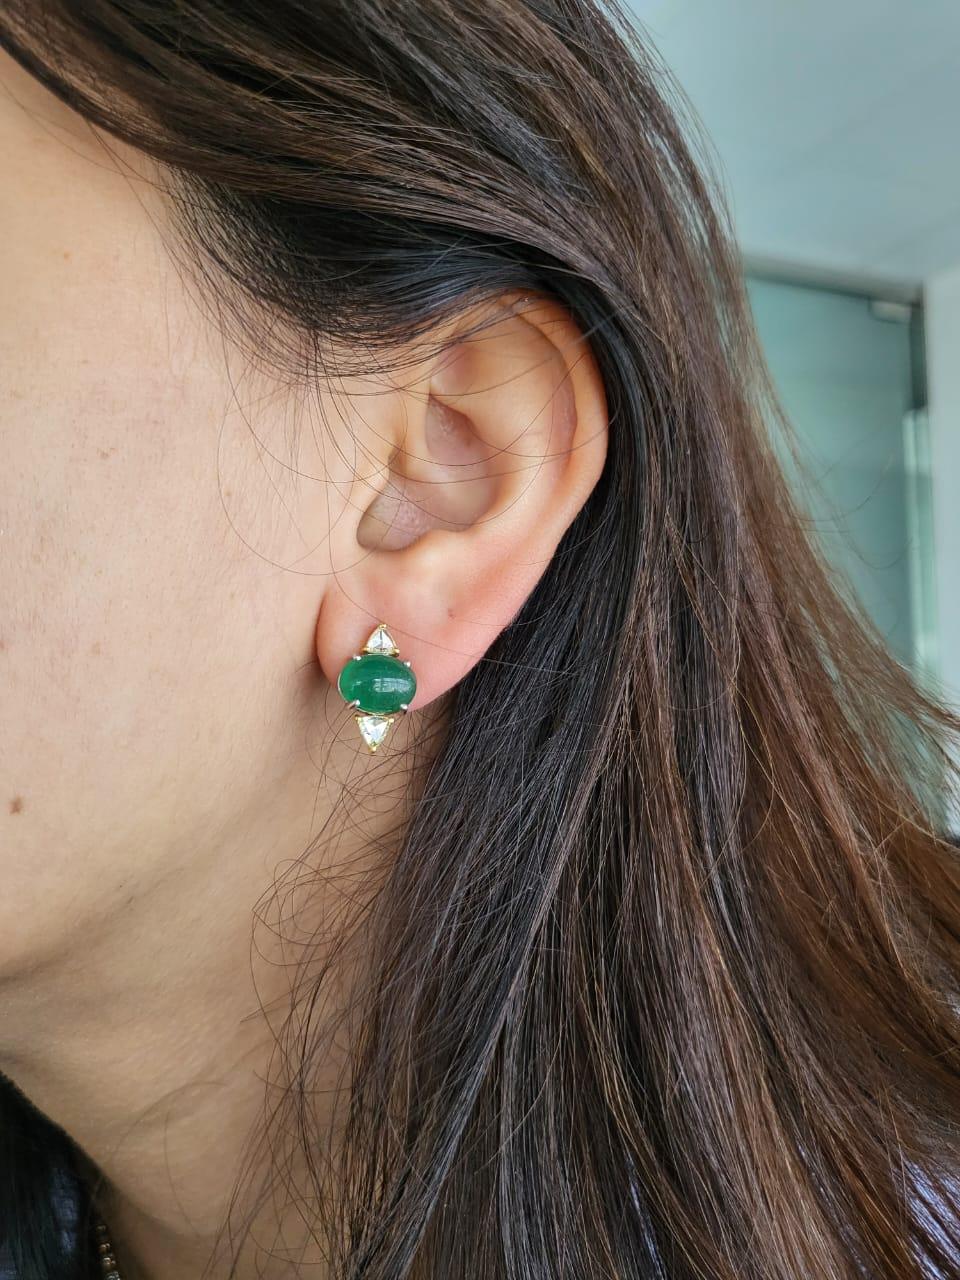 A very beautiful and one of a kind, Emerald Necklace and Earrings set in 18K Gold & Diamonds. The weight of the Emerald cabochons is 68.47 carats. The Emeralds are completely natural, without any treatment and is of Zambian origin. The weight of the